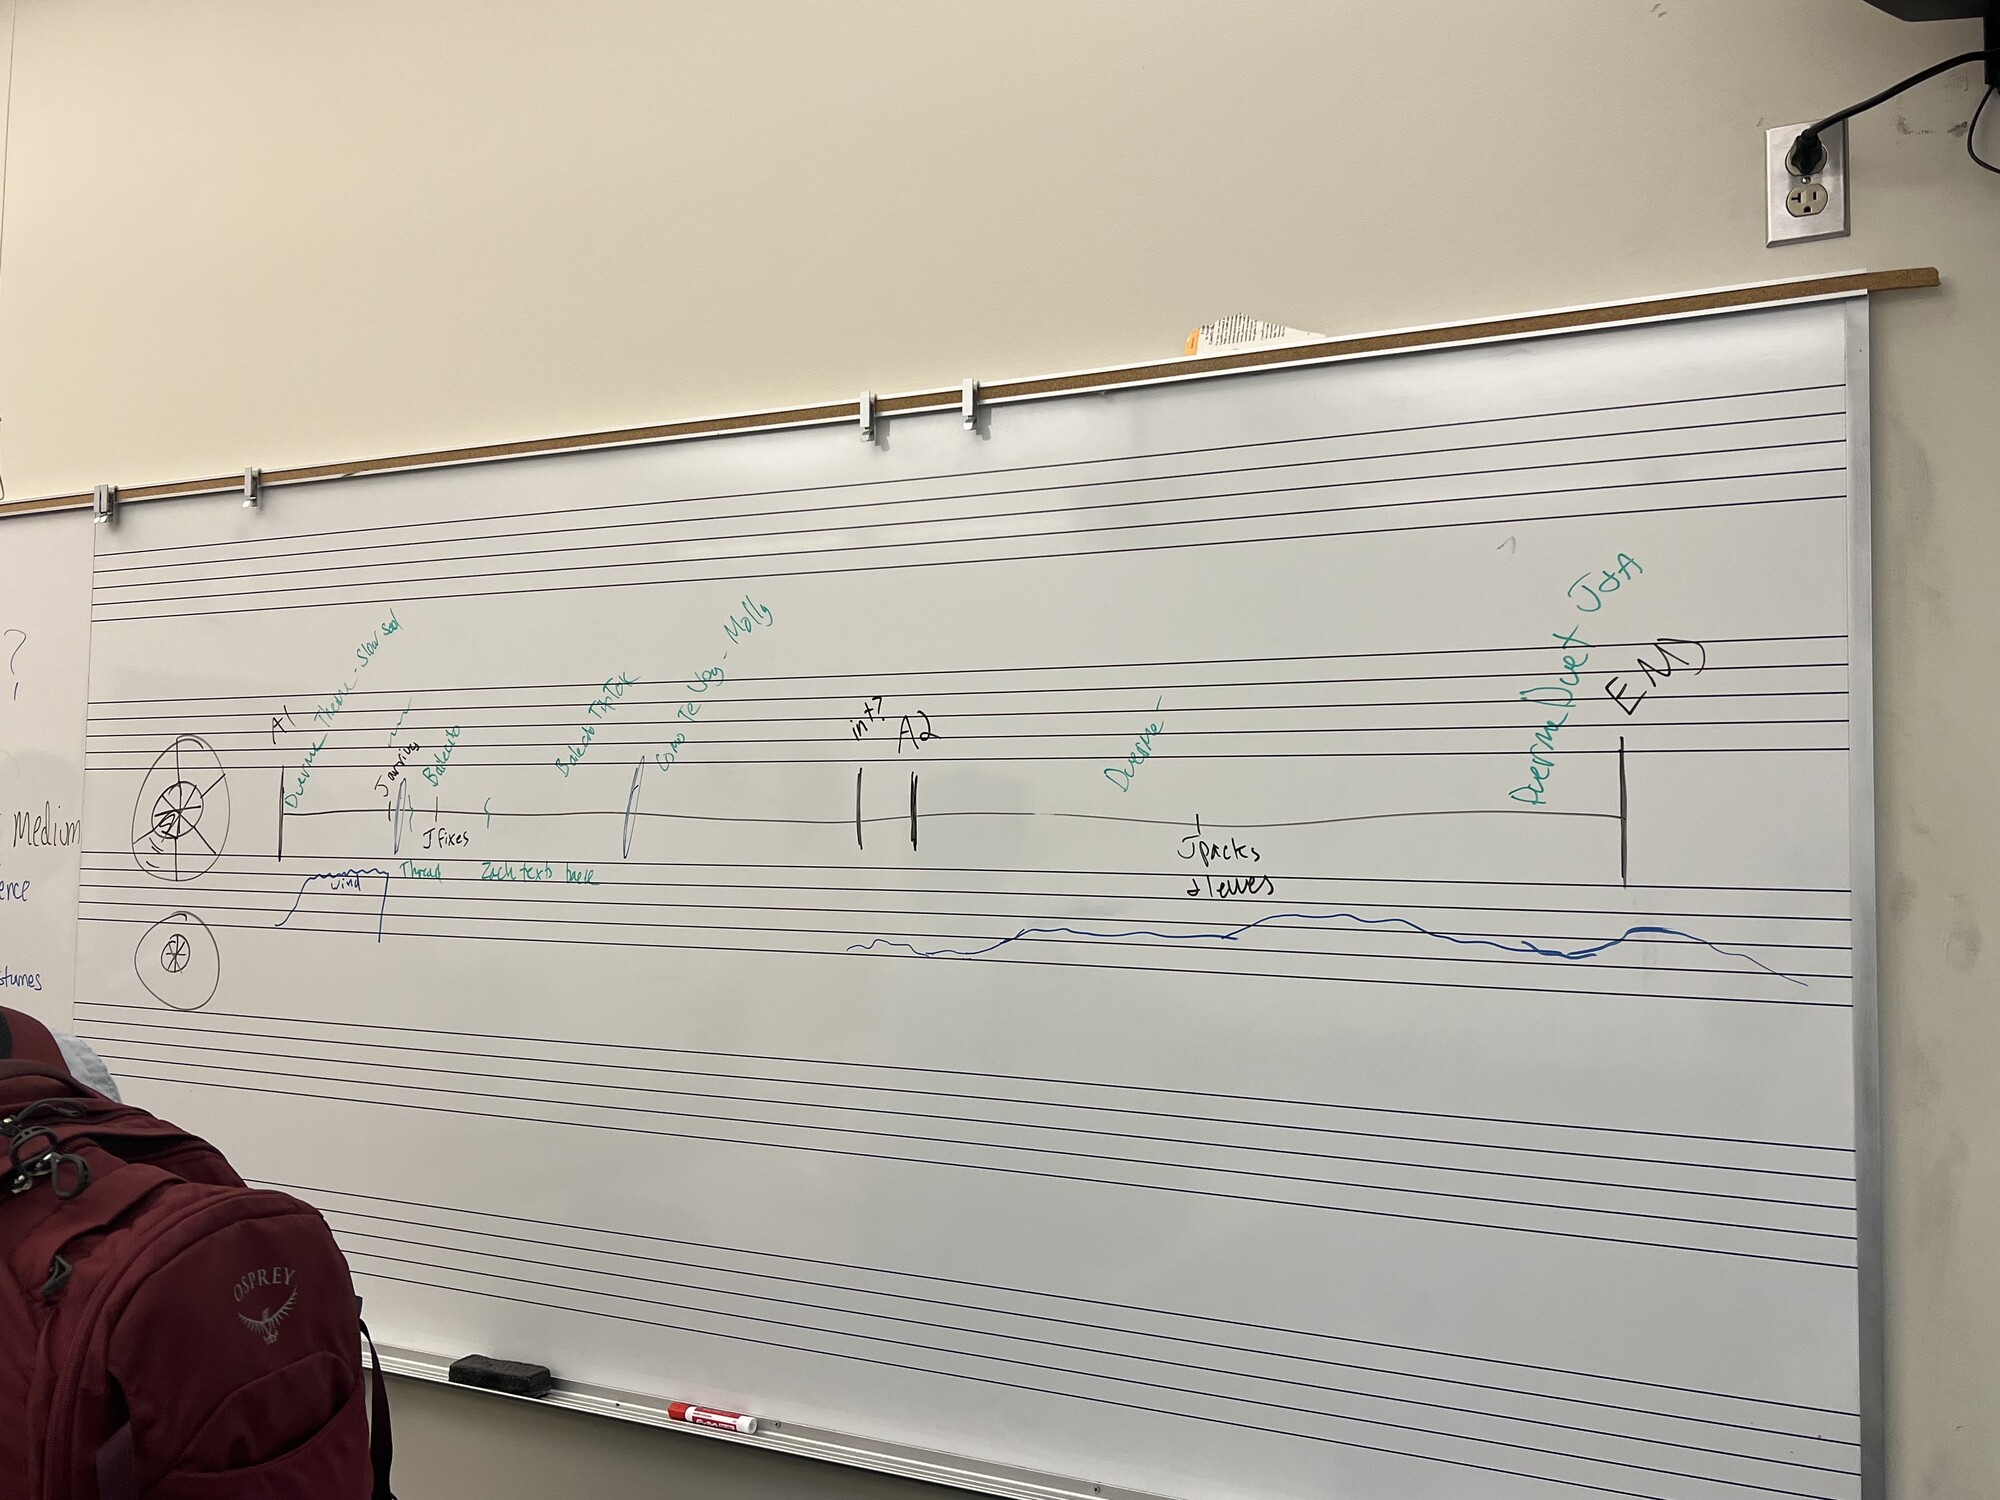 A whiteboard drawing of the sound design throughout the play.